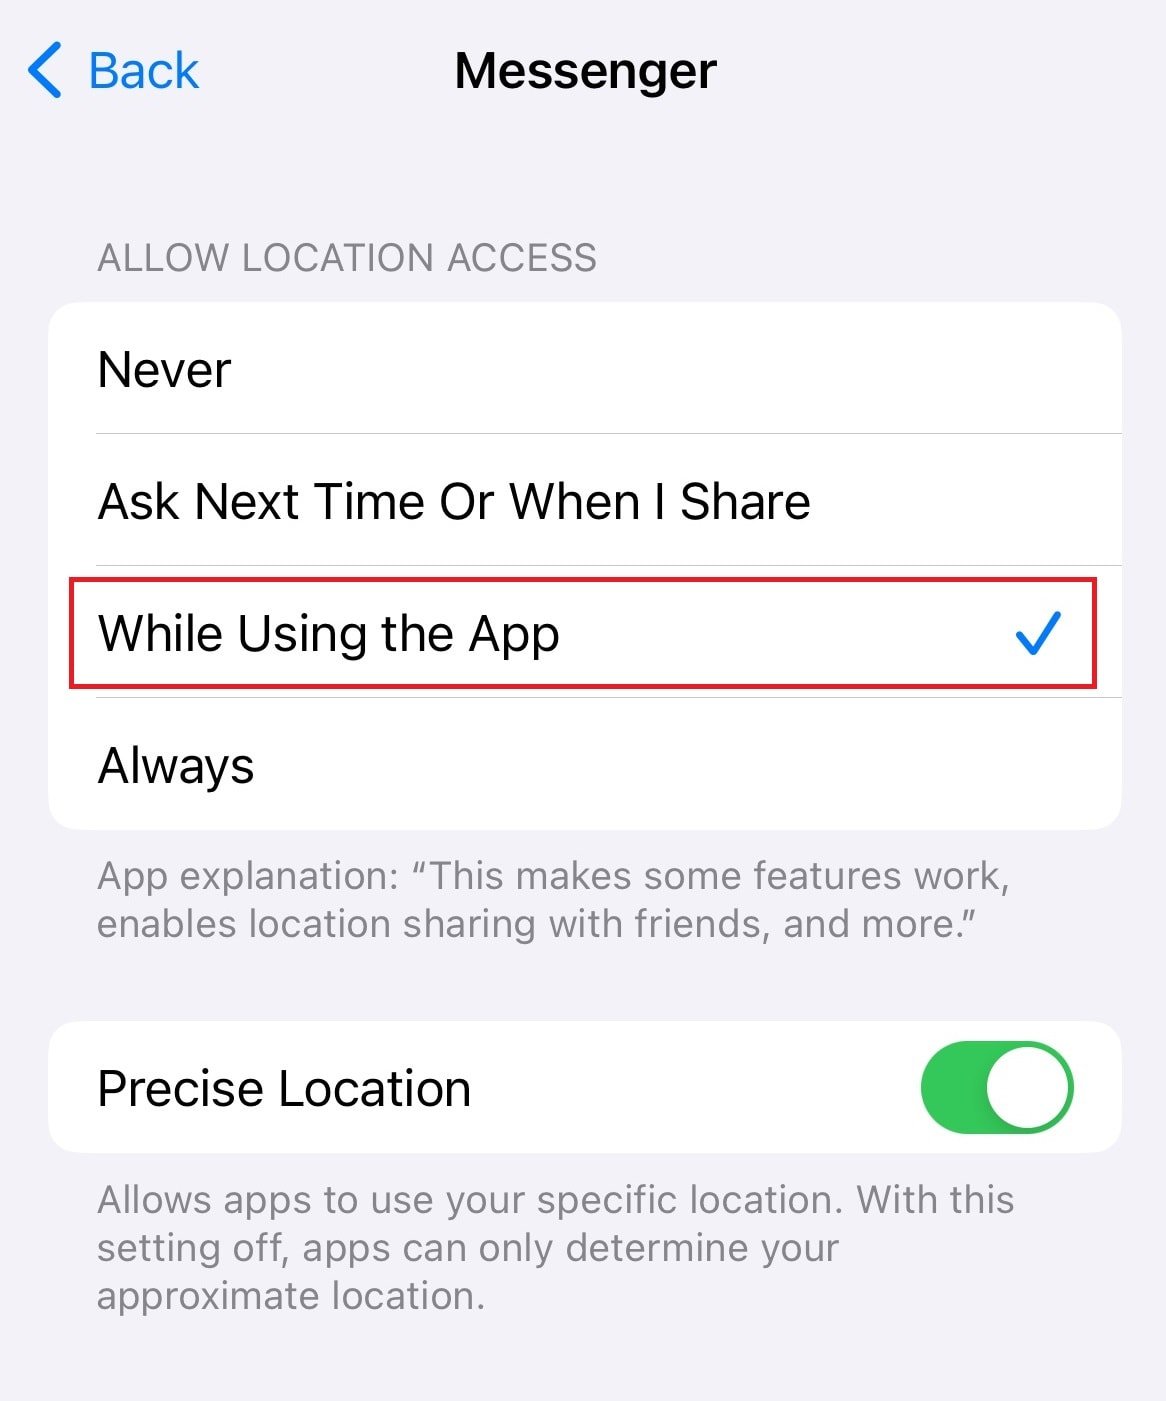 select While Using the App